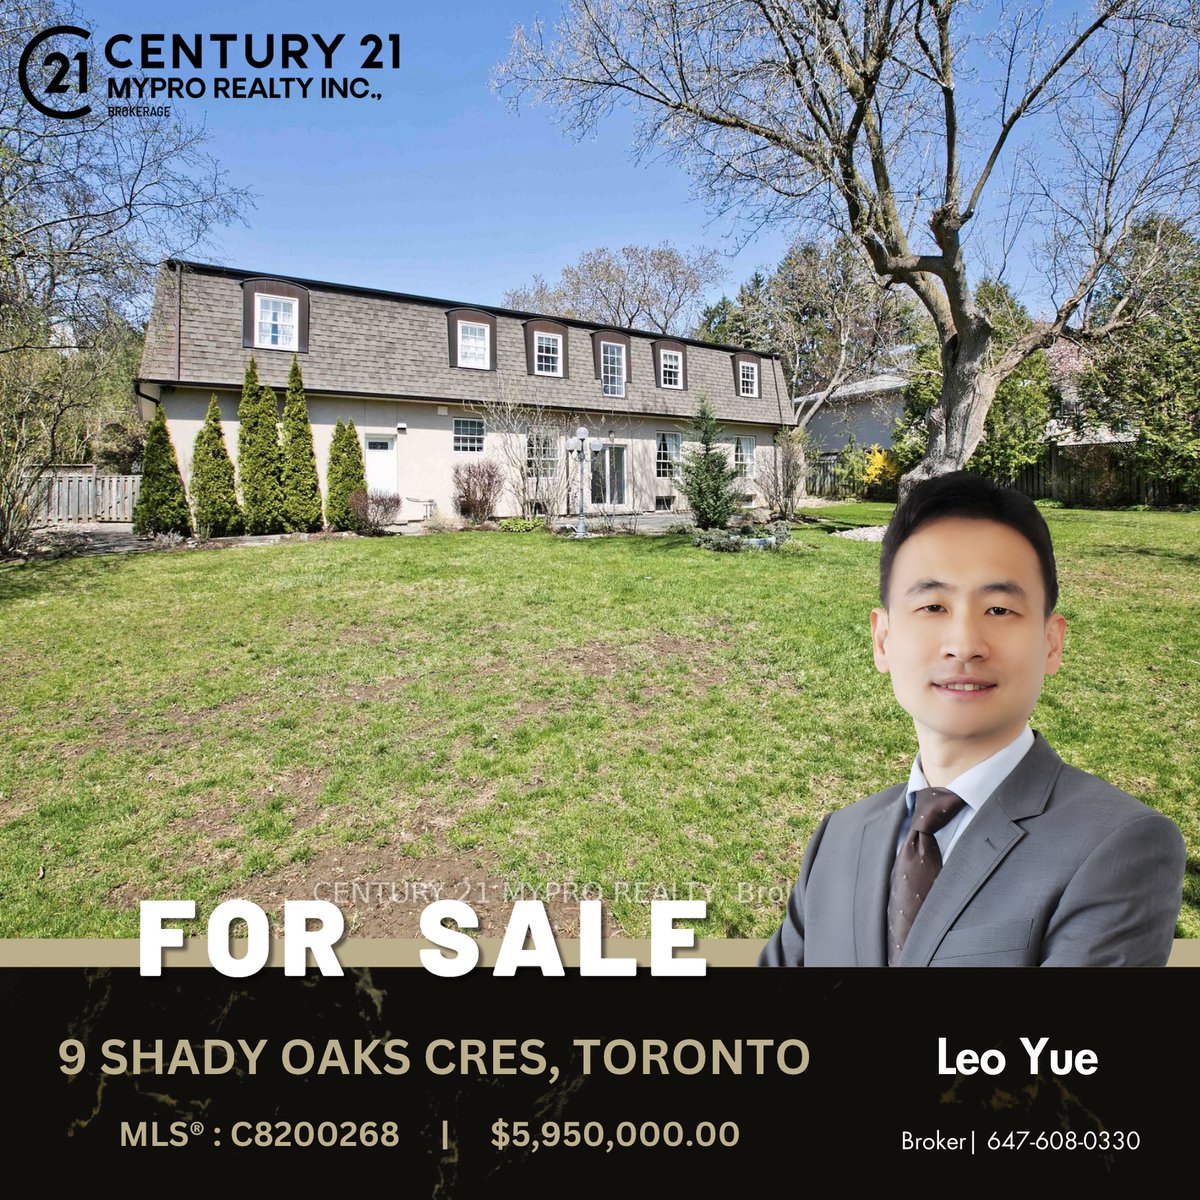 🌟 Great Opportunity To Move In The Prestigious Neighborhood🌟 Bridle Path Featuring 2 Storey House W/ 4 Bedrooms & 5 Bathrooms, Hardwood Floor Throughout. Open Concept Living & Dining Area. Modern Kitchen W/Central Island. #TorontoRealEstate #TorontoHomes #GTARealEstate